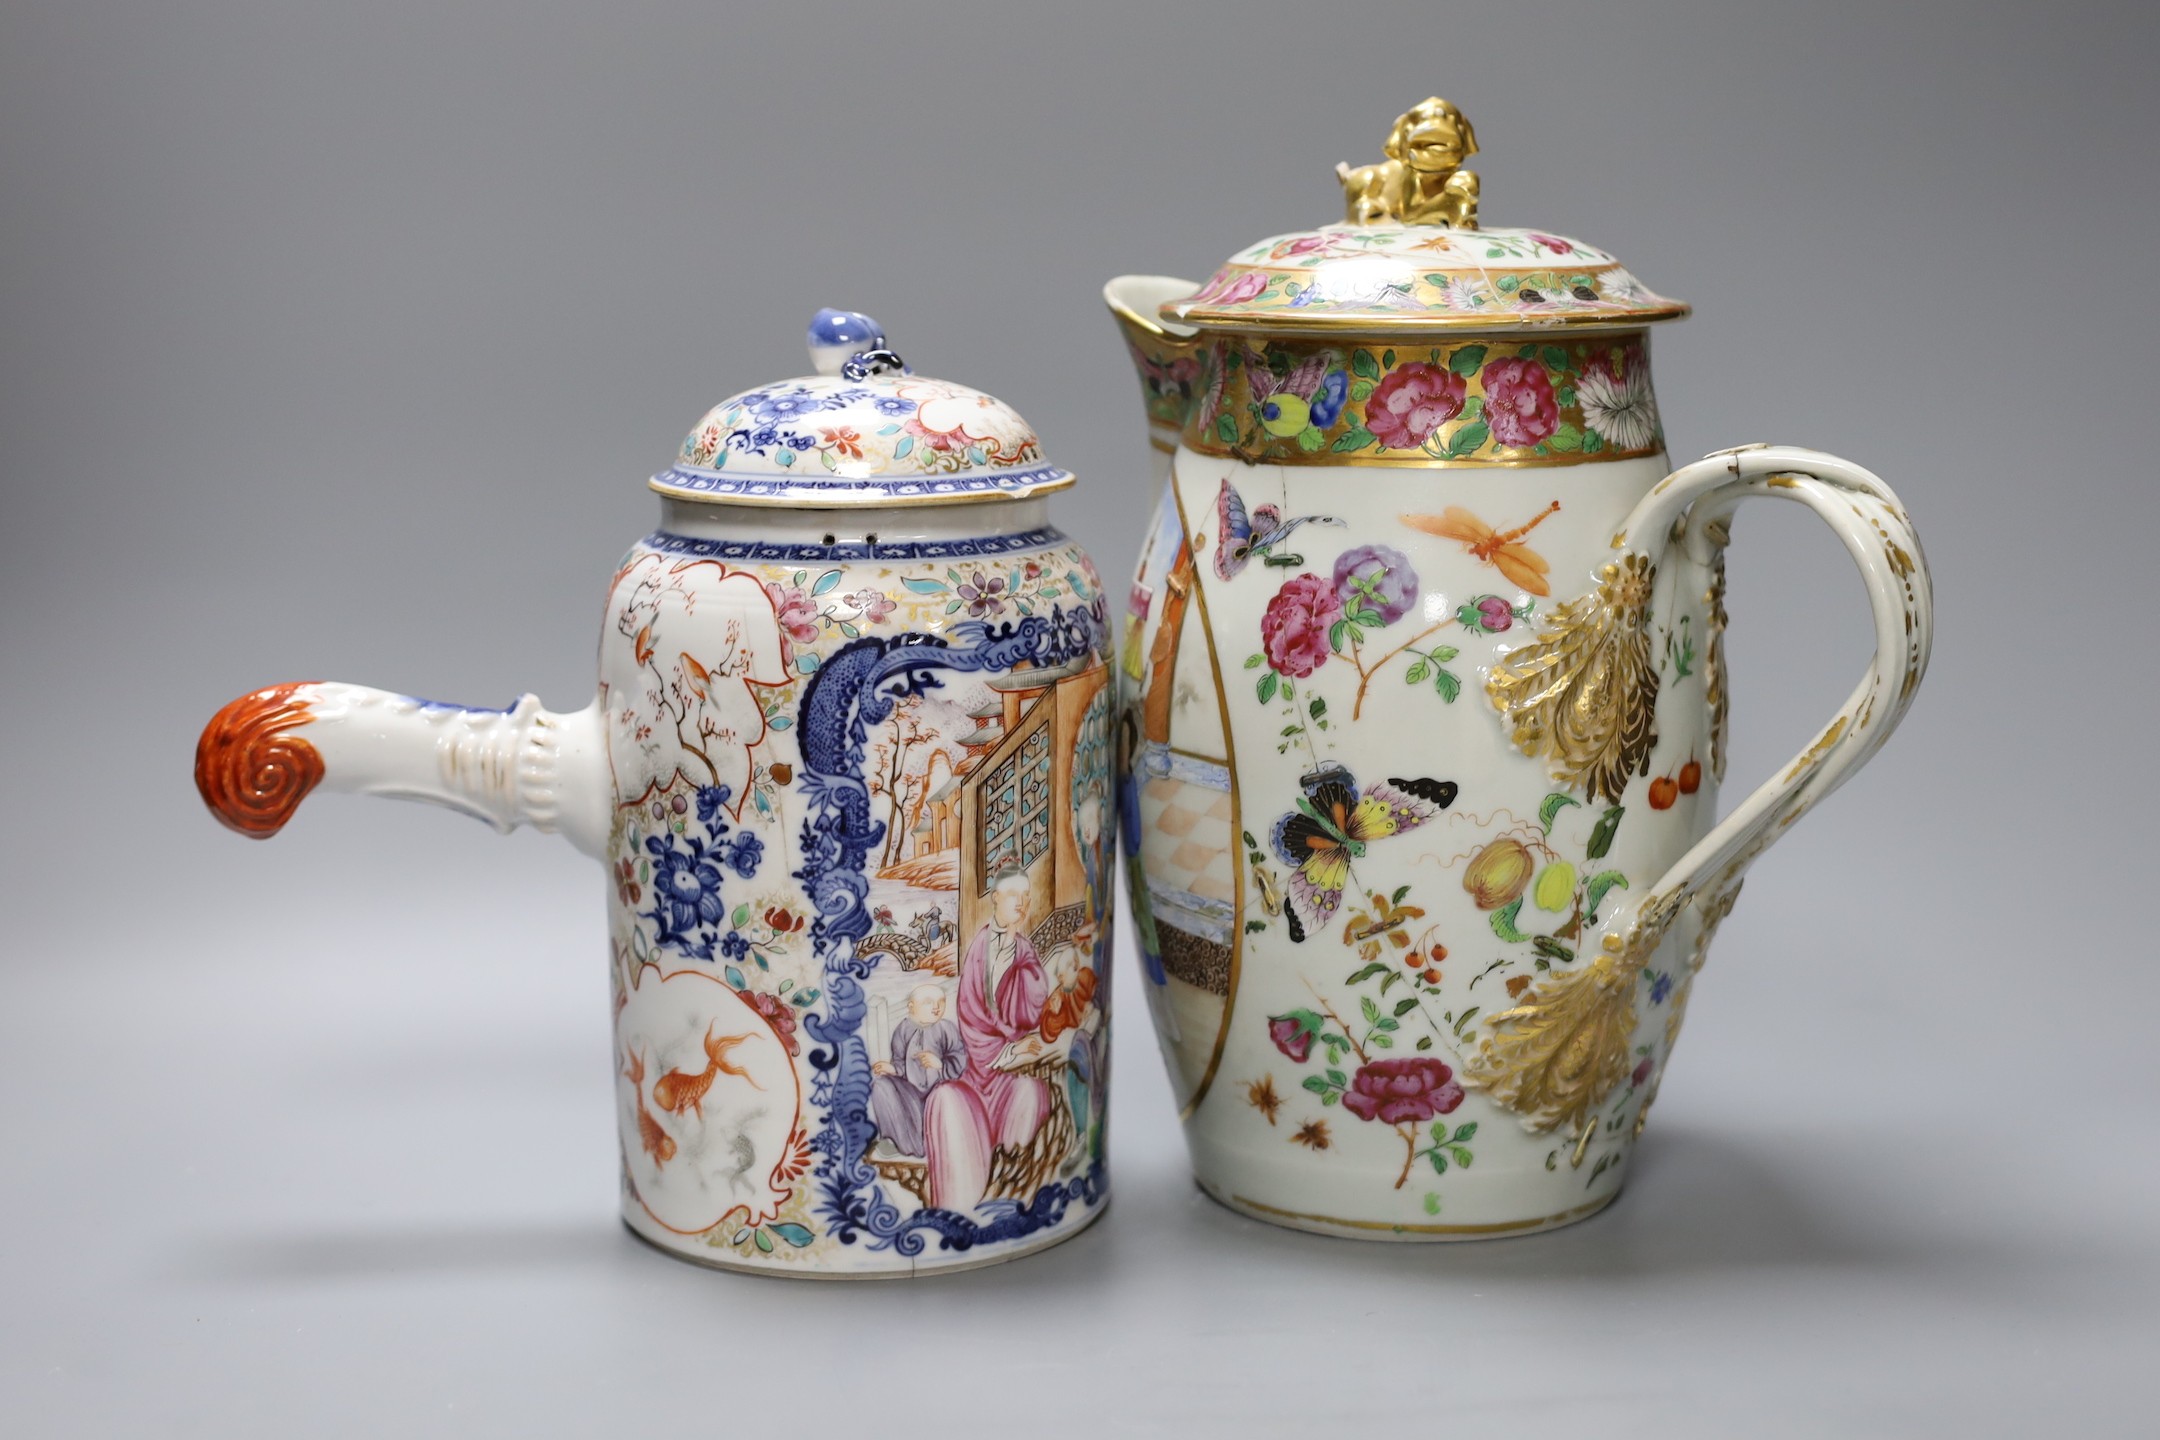 An 18th century Chinese export chocolate pot and cover, together with a Cantonese lidded jug, 26cm tall